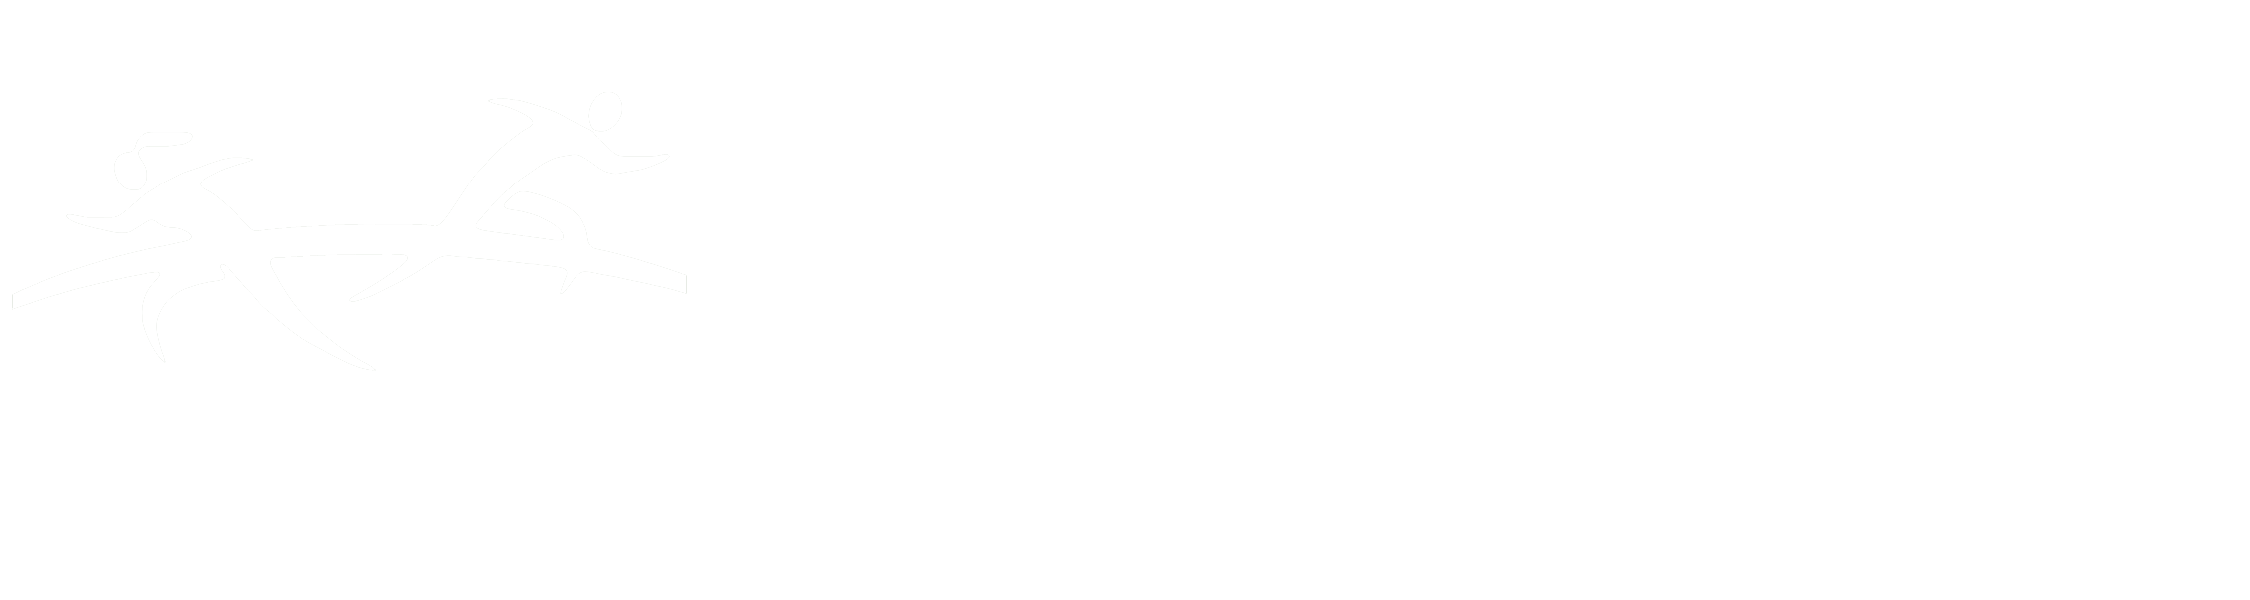 Attentive Health and Wellness Logo